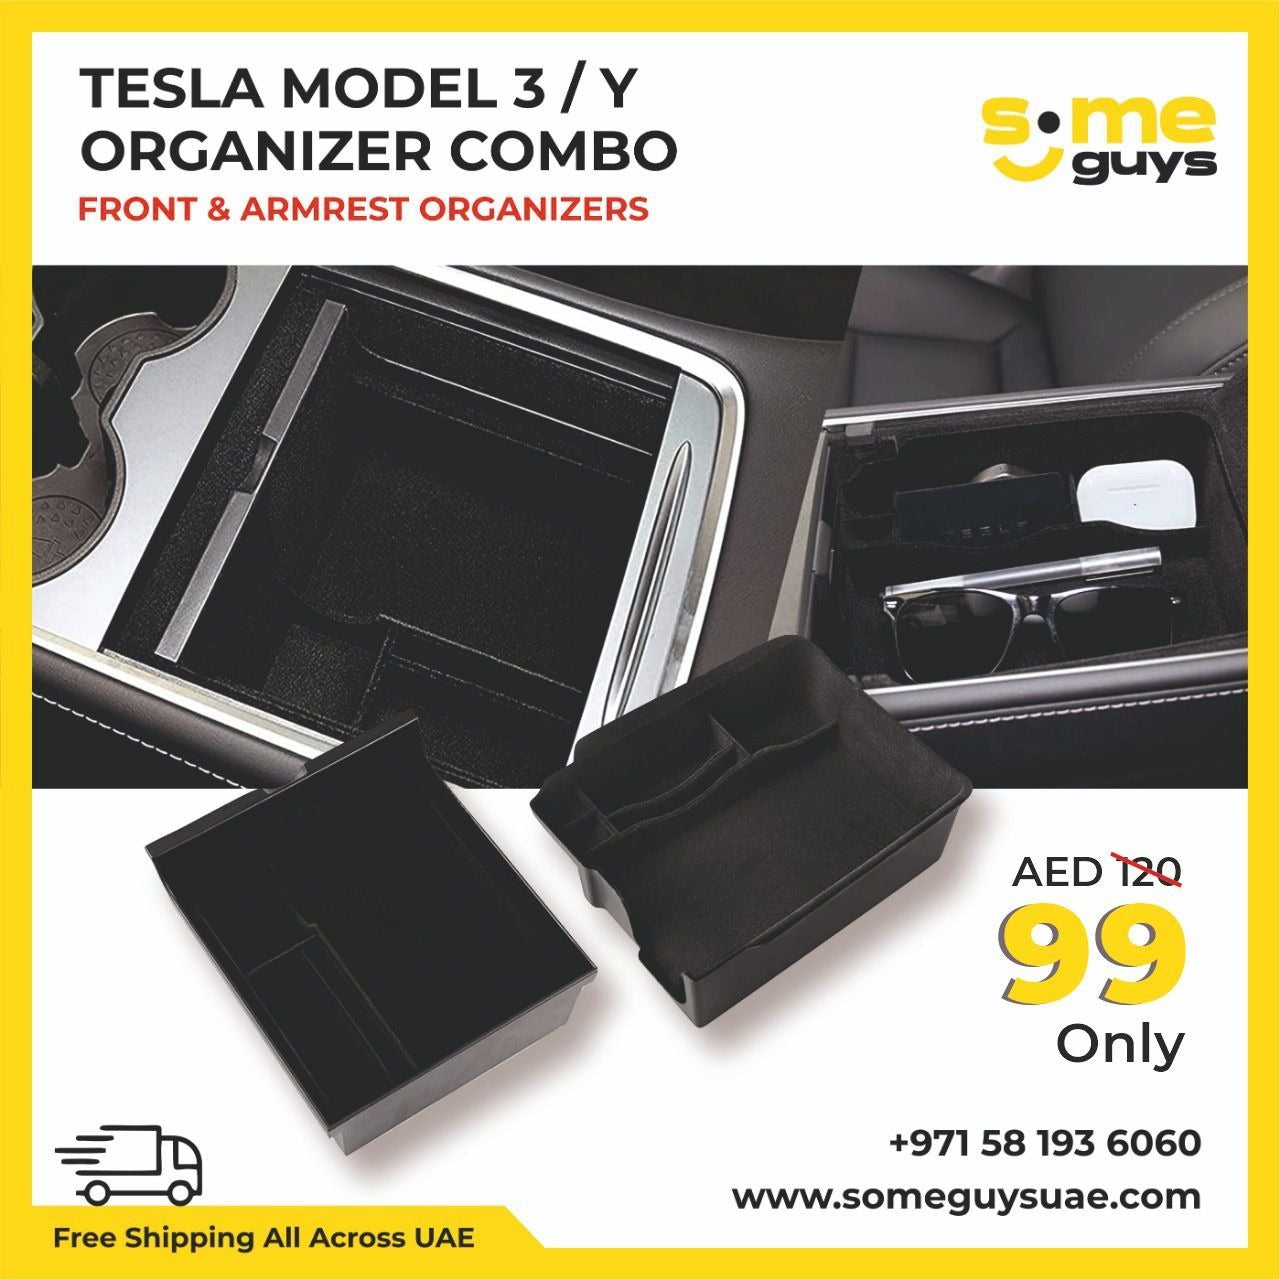 Tesla Model 3/Y Center Console Tray with removable divider by